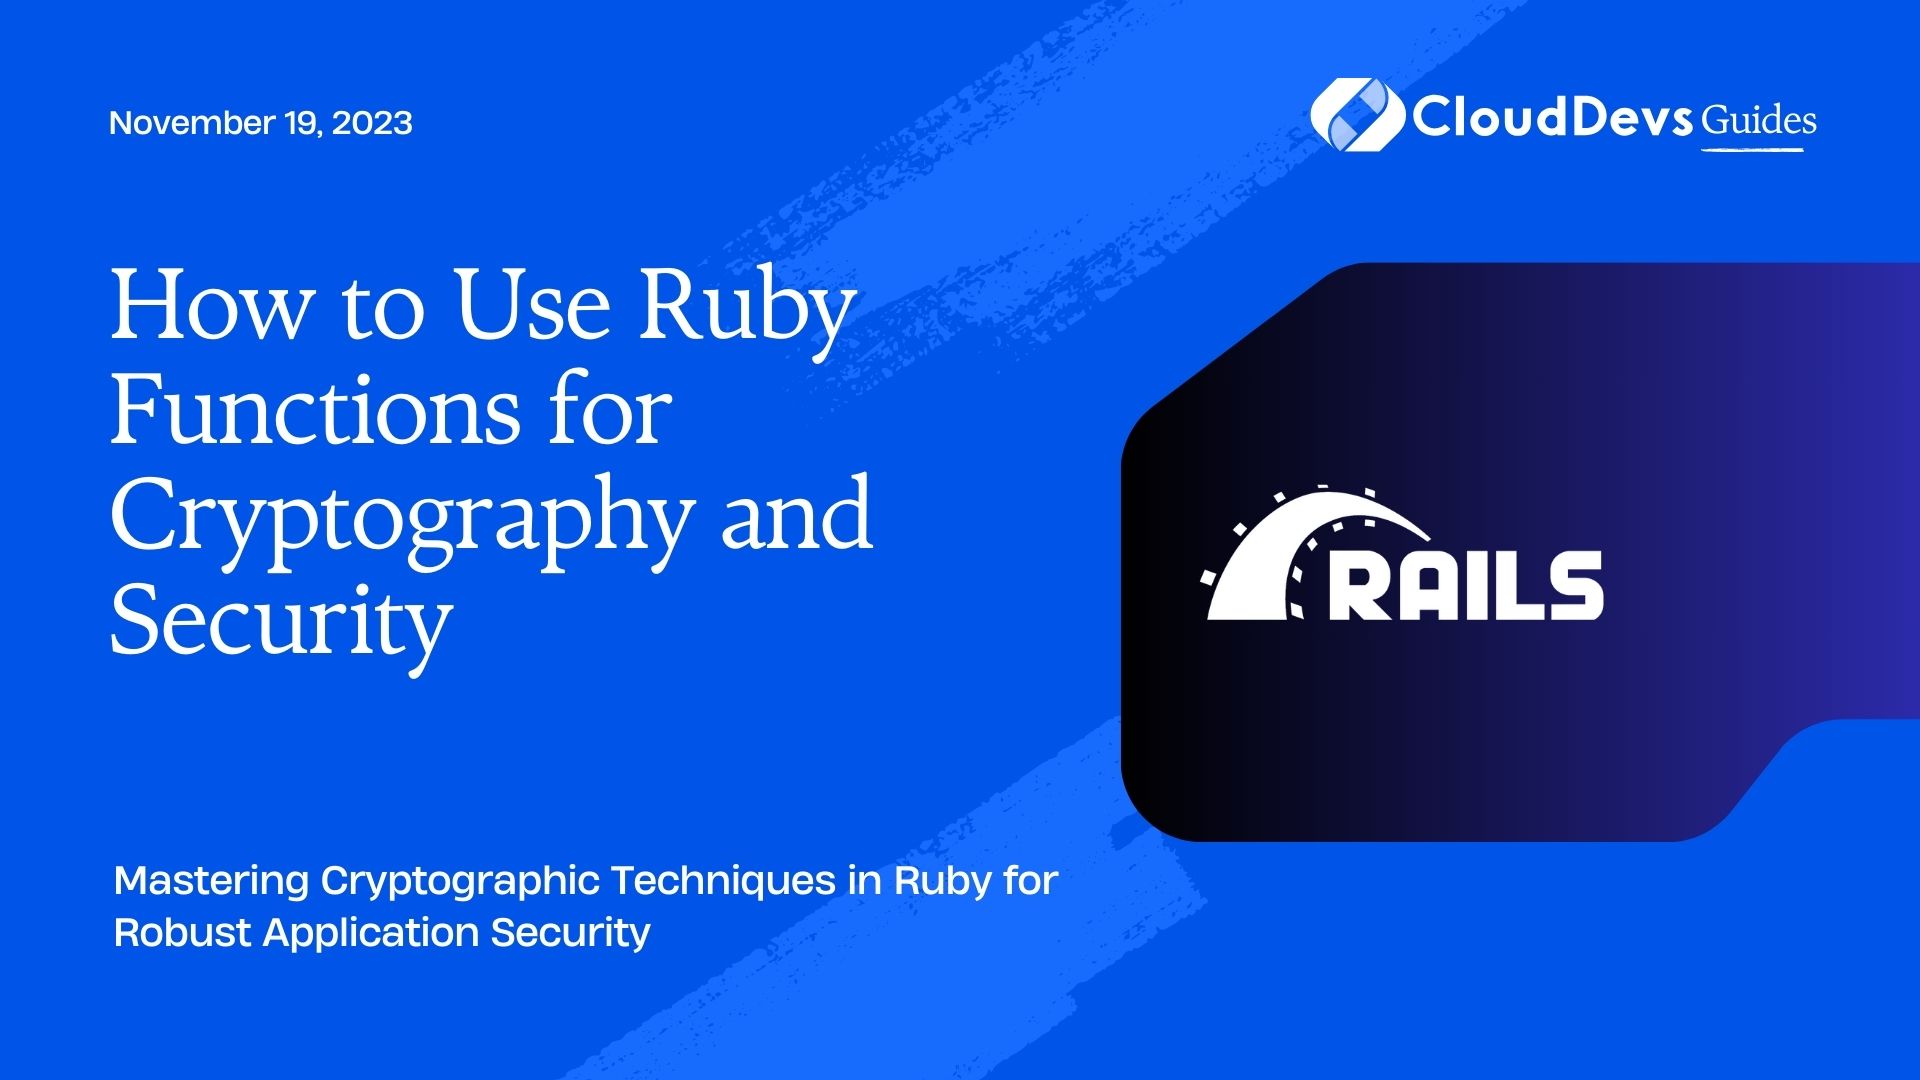 How to Use Ruby Functions for Cryptography and Security